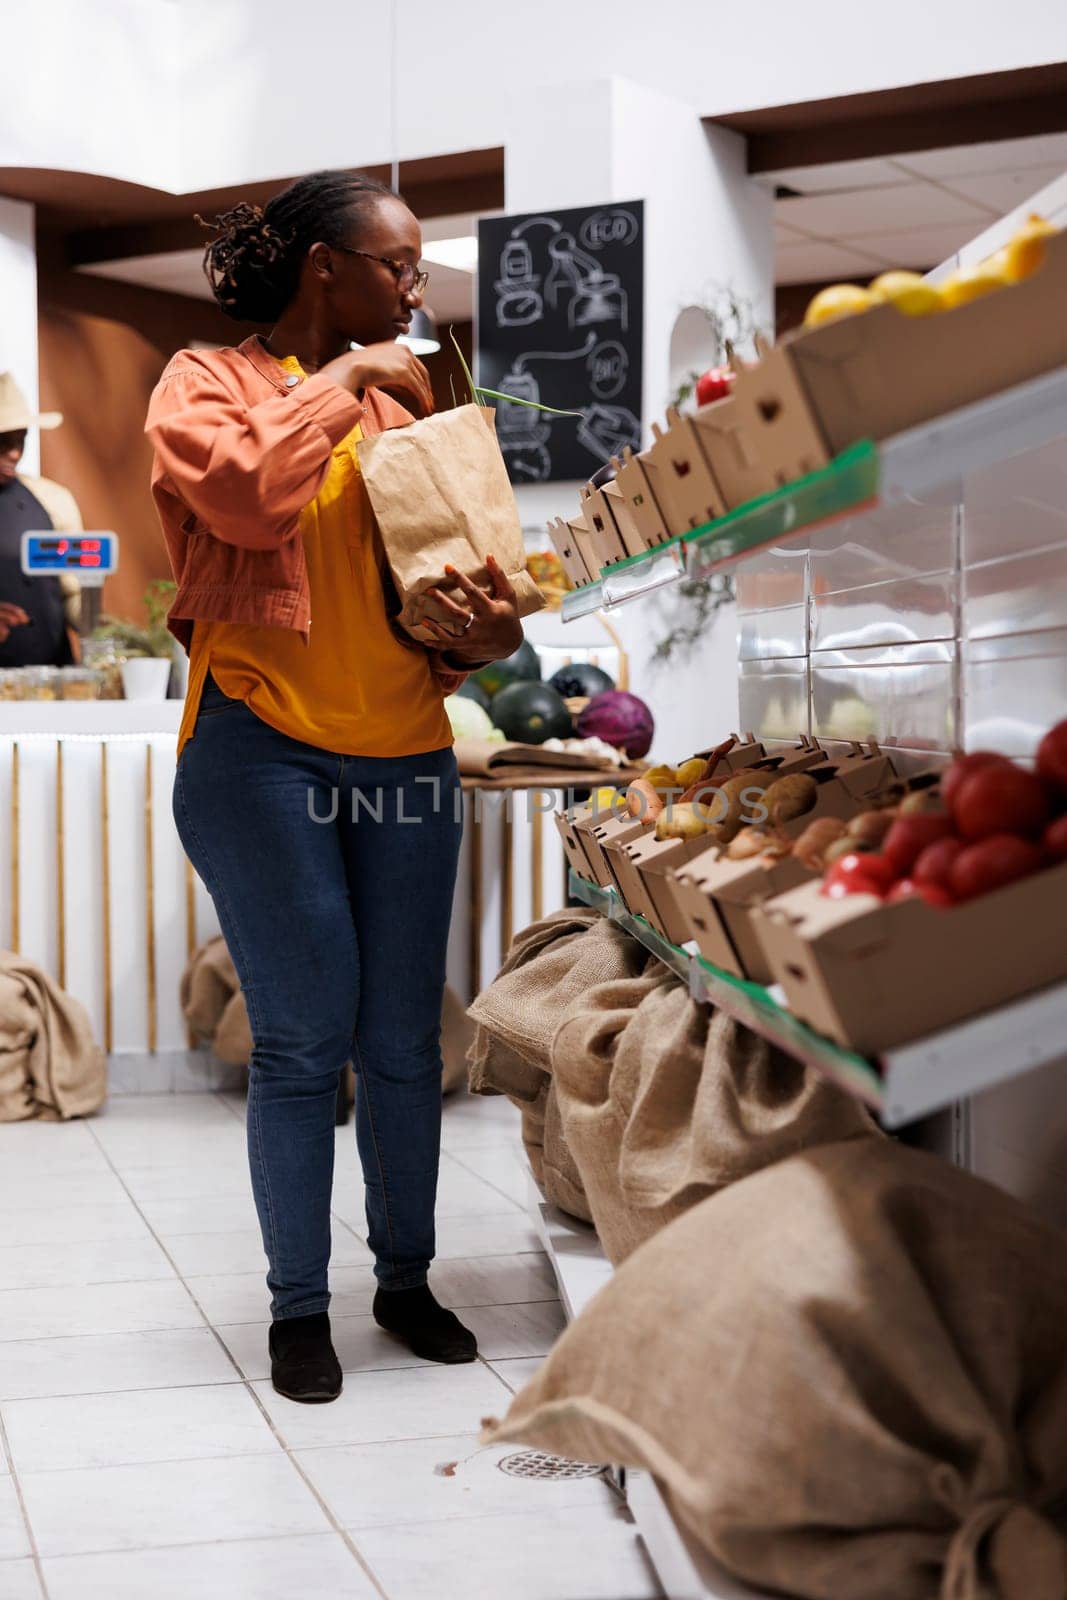 A youthful black woman choosing bulk organic products, using reusable bags. Image showing an African American female customer looking for a variety of fruits and vegetables.